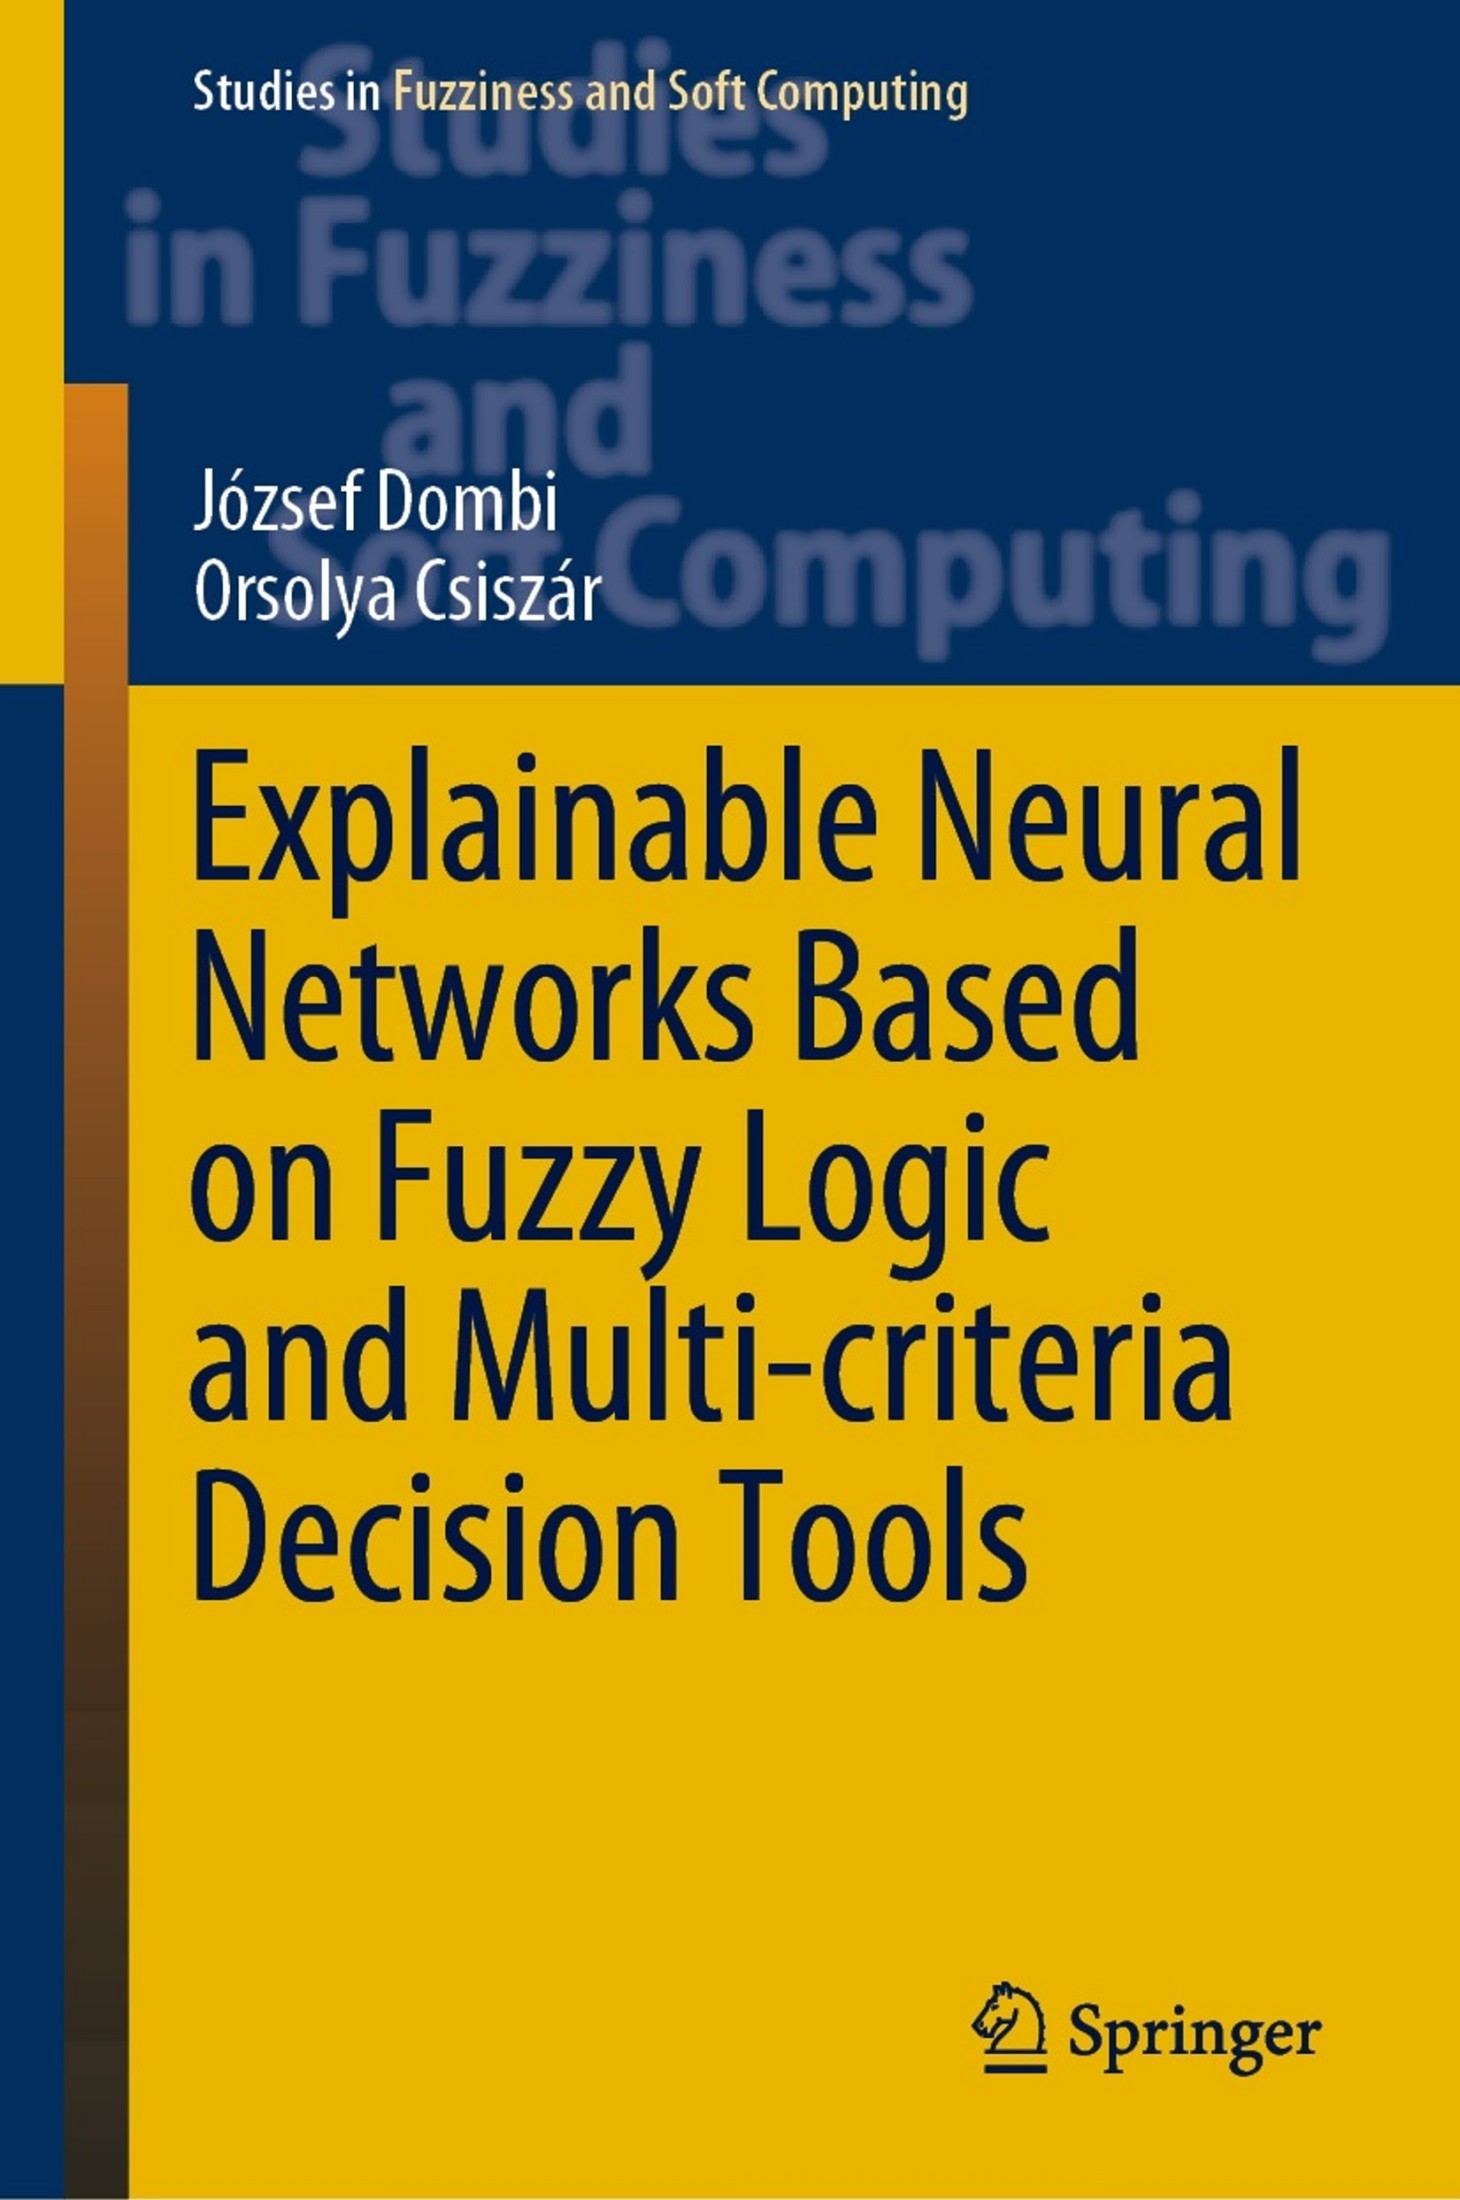 Explainable Neural Networks Based on Fuzzy Logic and Multi-Criteria Decision Tools